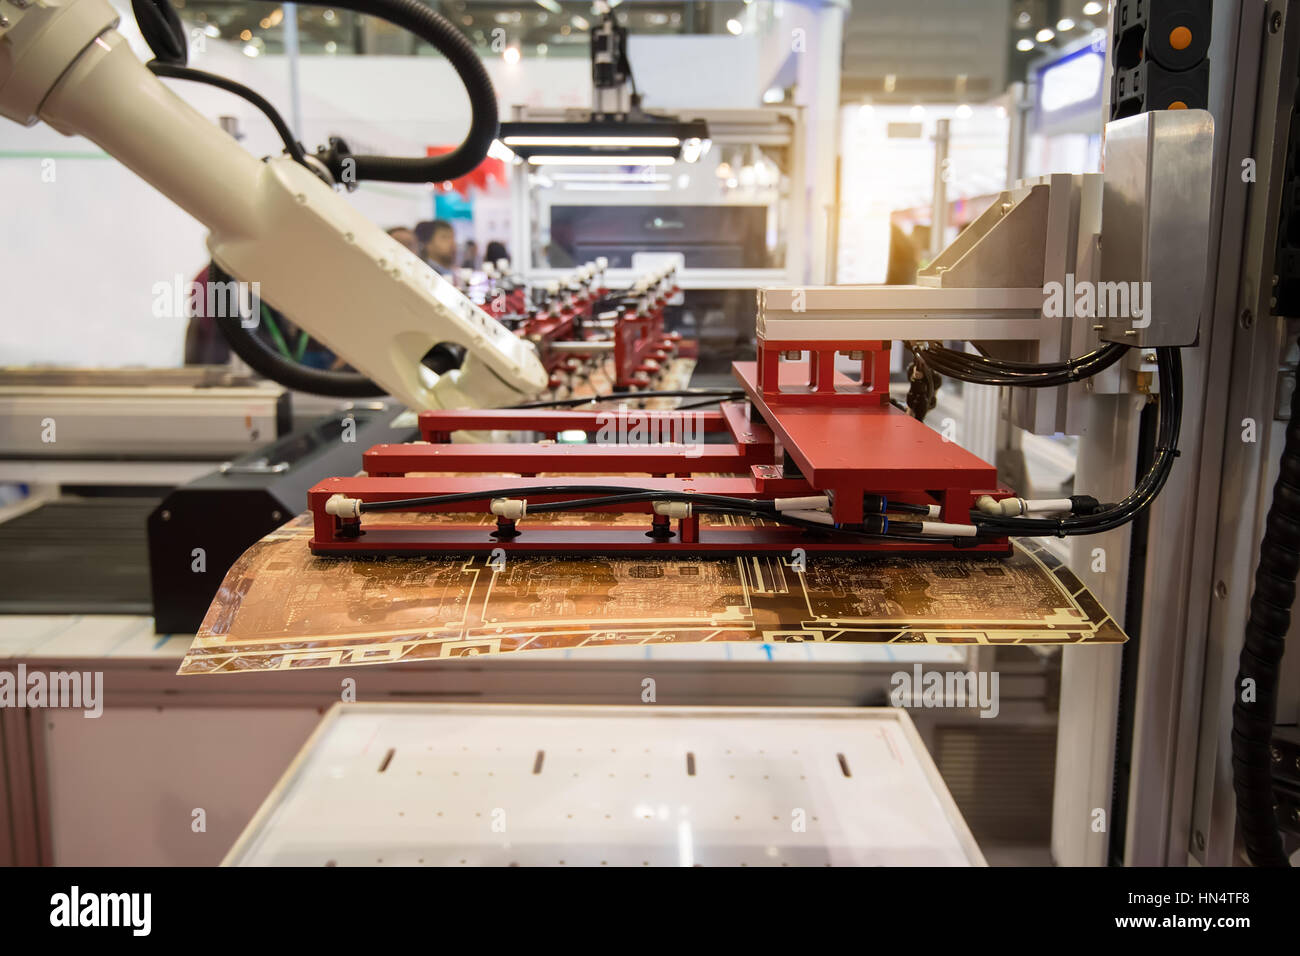 artificial intelligence machine at industrial manufacture factory Stock Photo